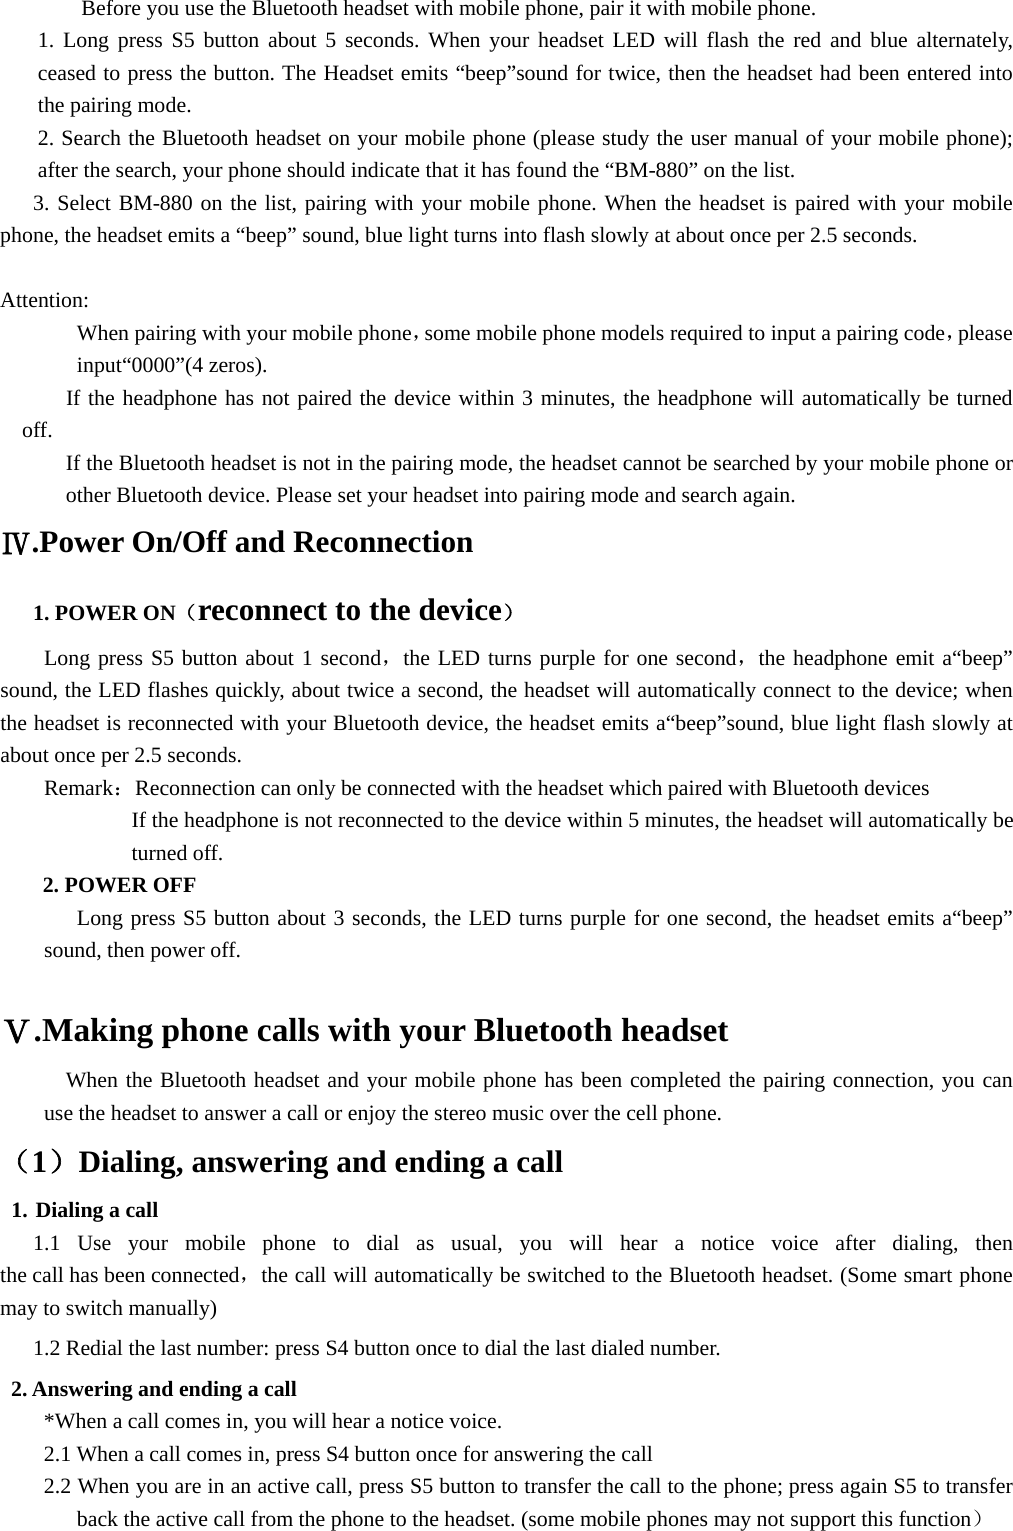 Before you use the Bluetooth headset with mobile phone, pair it with mobile phone.   1. Long press S5 button about 5 seconds. When your headset LED will flash the red and blue alternately, ceased to press the button. The Headset emits “beep”sound for twice, then the headset had been entered into the pairing mode. 2. Search the Bluetooth headset on your mobile phone (please study the user manual of your mobile phone); after the search, your phone should indicate that it has found the “BM-880” on the list. 3. Select BM-880 on the list, pairing with your mobile phone. When the headset is paired with your mobile phone, the headset emits a “beep” sound, blue light turns into flash slowly at about once per 2.5 seconds.  Attention:        When pairing with your mobile phone，some mobile phone models required to input a pairing code，please input“0000”(4 zeros).           If the headphone has not paired the device within 3 minutes, the headphone will automatically be turned off. If the Bluetooth headset is not in the pairing mode, the headset cannot be searched by your mobile phone or other Bluetooth device. Please set your headset into pairing mode and search again. Ⅳ.Power On/Off and Reconnection    1. POWER ON（reconnect to the device） Long press S5 button about 1 second，the LED turns purple for one second，the headphone emit a“beep” sound, the LED flashes quickly, about twice a second, the headset will automatically connect to the device; when the headset is reconnected with your Bluetooth device, the headset emits a“beep”sound, blue light flash slowly at about once per 2.5 seconds. Remark：Reconnection can only be connected with the headset which paired with Bluetooth devices                 If the headphone is not reconnected to the device within 5 minutes, the headset will automatically be turned off. 2. POWER OFF  Long press S5 button about 3 seconds, the LED turns purple for one second, the headset emits a“beep” sound, then power off.  Ⅴ.Making phone calls with your Bluetooth headset When the Bluetooth headset and your mobile phone has been completed the pairing connection, you can use the headset to answer a call or enjoy the stereo music over the cell phone. （1）Dialing, answering and ending a call 1. Dialing a call 1.1 Use your mobile phone to dial as usual, you will hear a notice voice after dialing, then the call has been connected，the call will automatically be switched to the Bluetooth headset. (Some smart phone may to switch manually) 1.2 Redial the last number: press S4 button once to dial the last dialed number. 2. Answering and ending a call *When a call comes in, you will hear a notice voice. 2.1 When a call comes in, press S4 button once for answering the call 2.2 When you are in an active call, press S5 button to transfer the call to the phone; press again S5 to transfer back the active call from the phone to the headset. (some mobile phones may not support this function） 